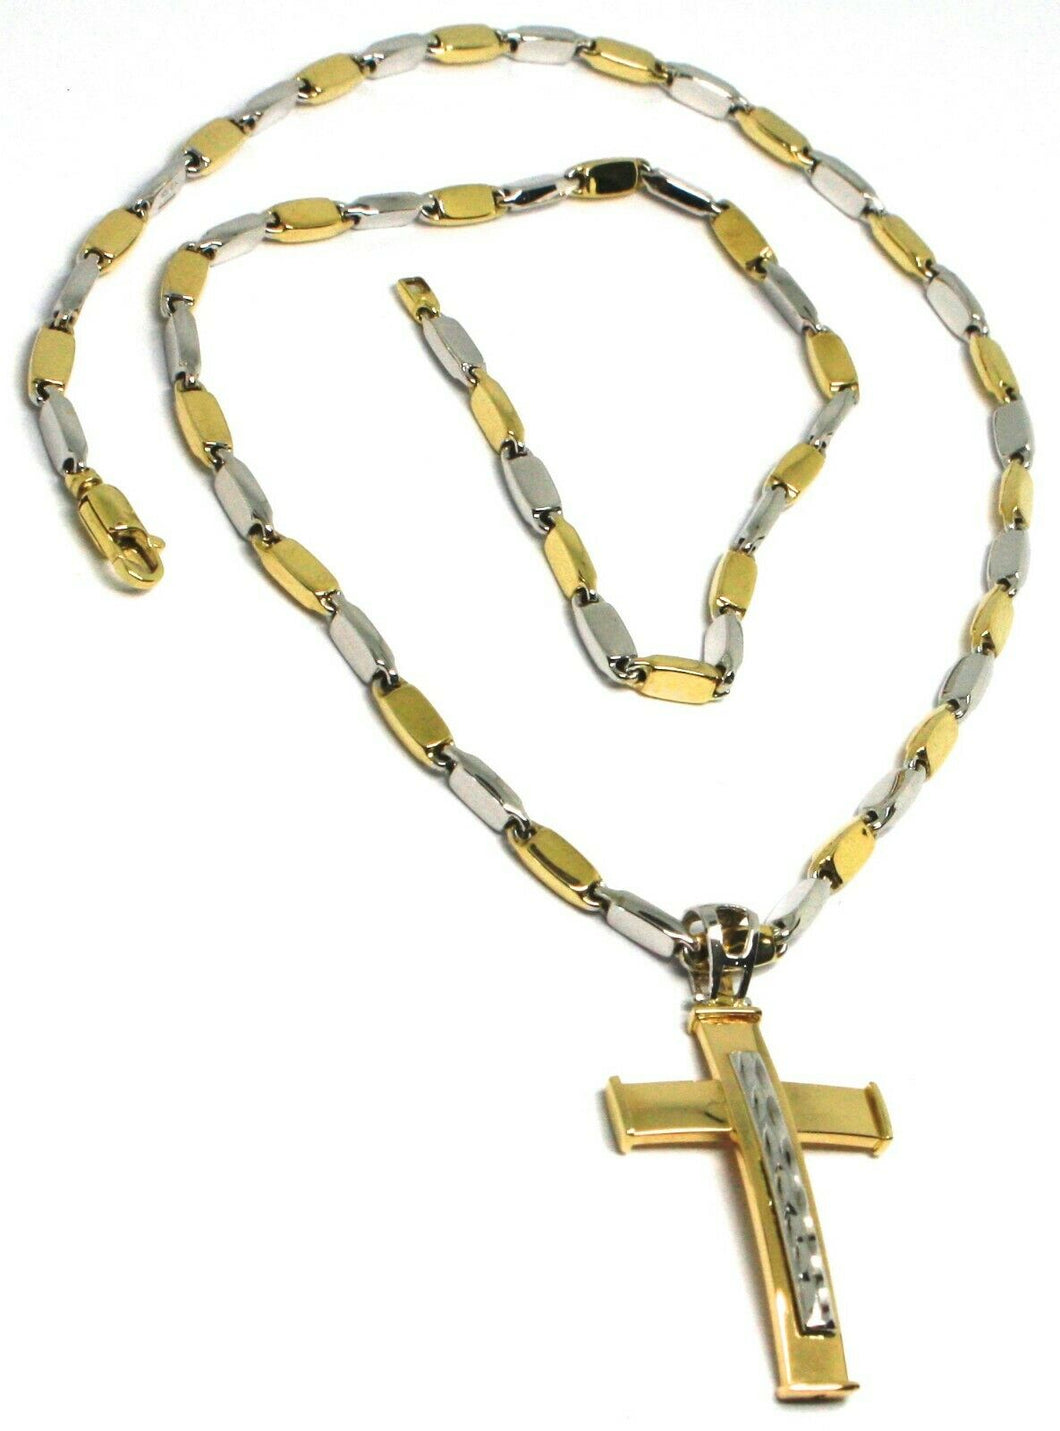 18K YELLOW WHITE GOLD TUBE ALTERNATE CHAIN, 20 INCHES & WORKED CURVED CROSS.